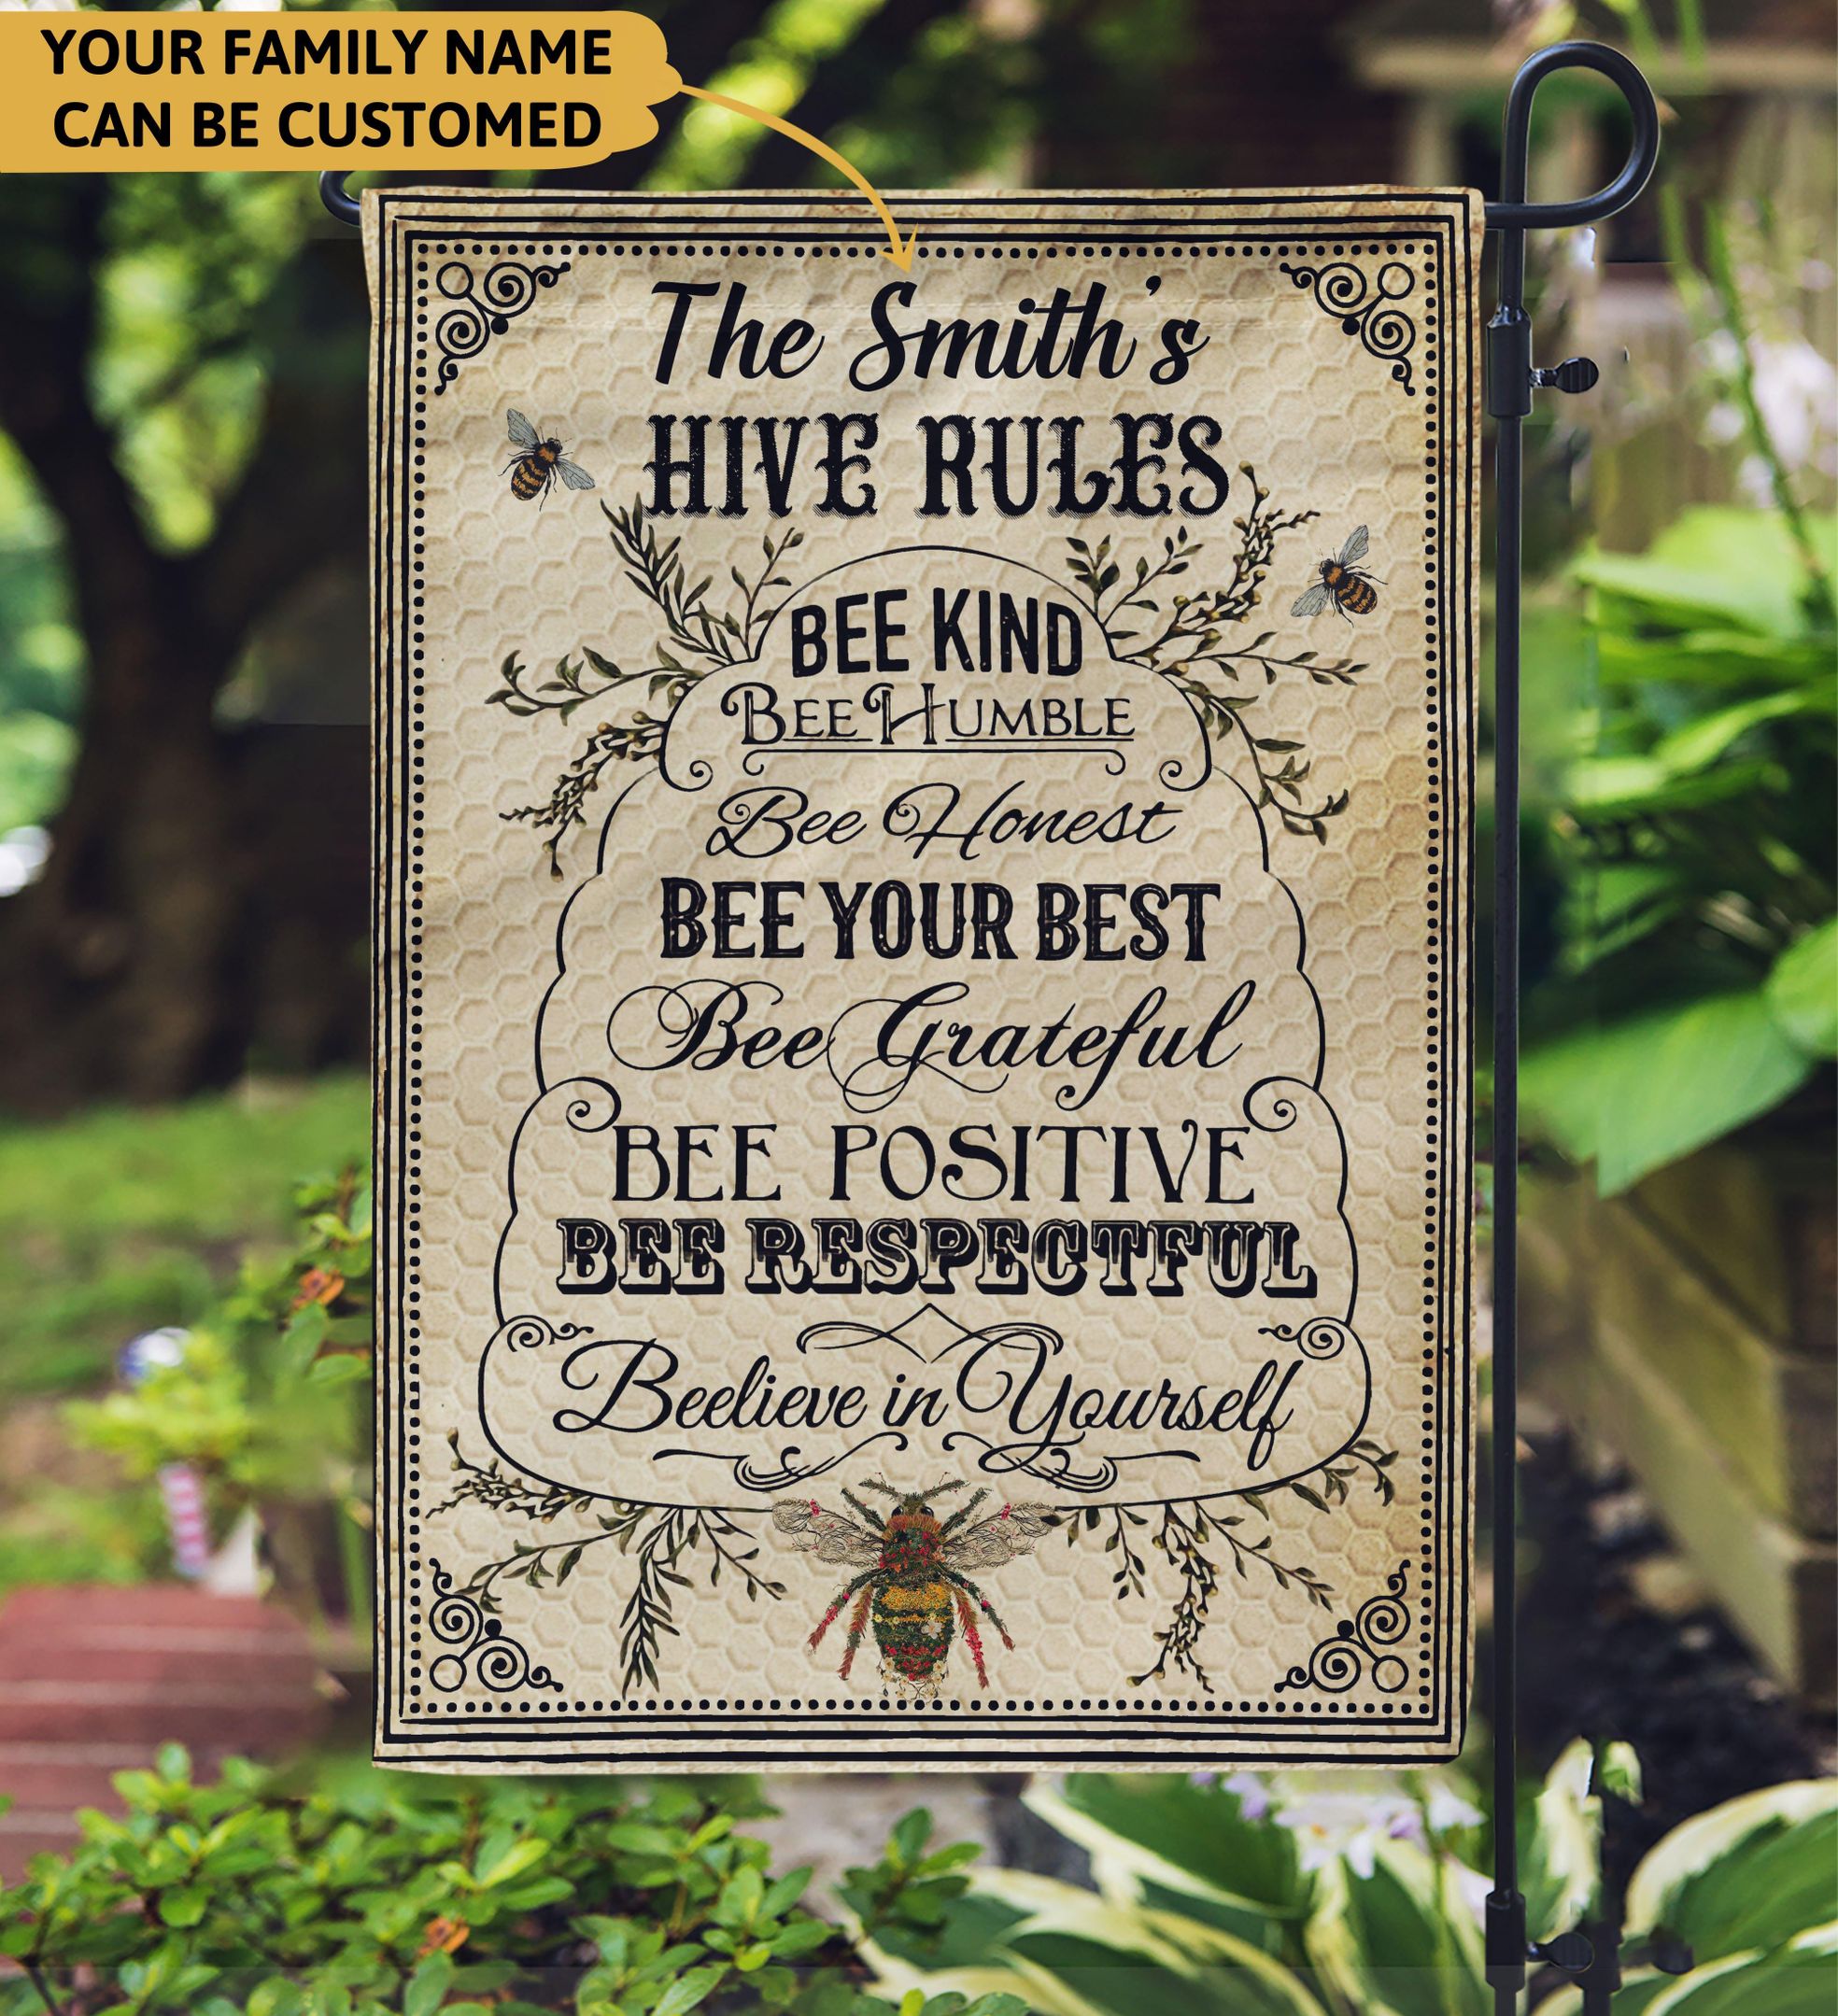 Personalized - Bee Hive Rules Custom Garden Flag PAN